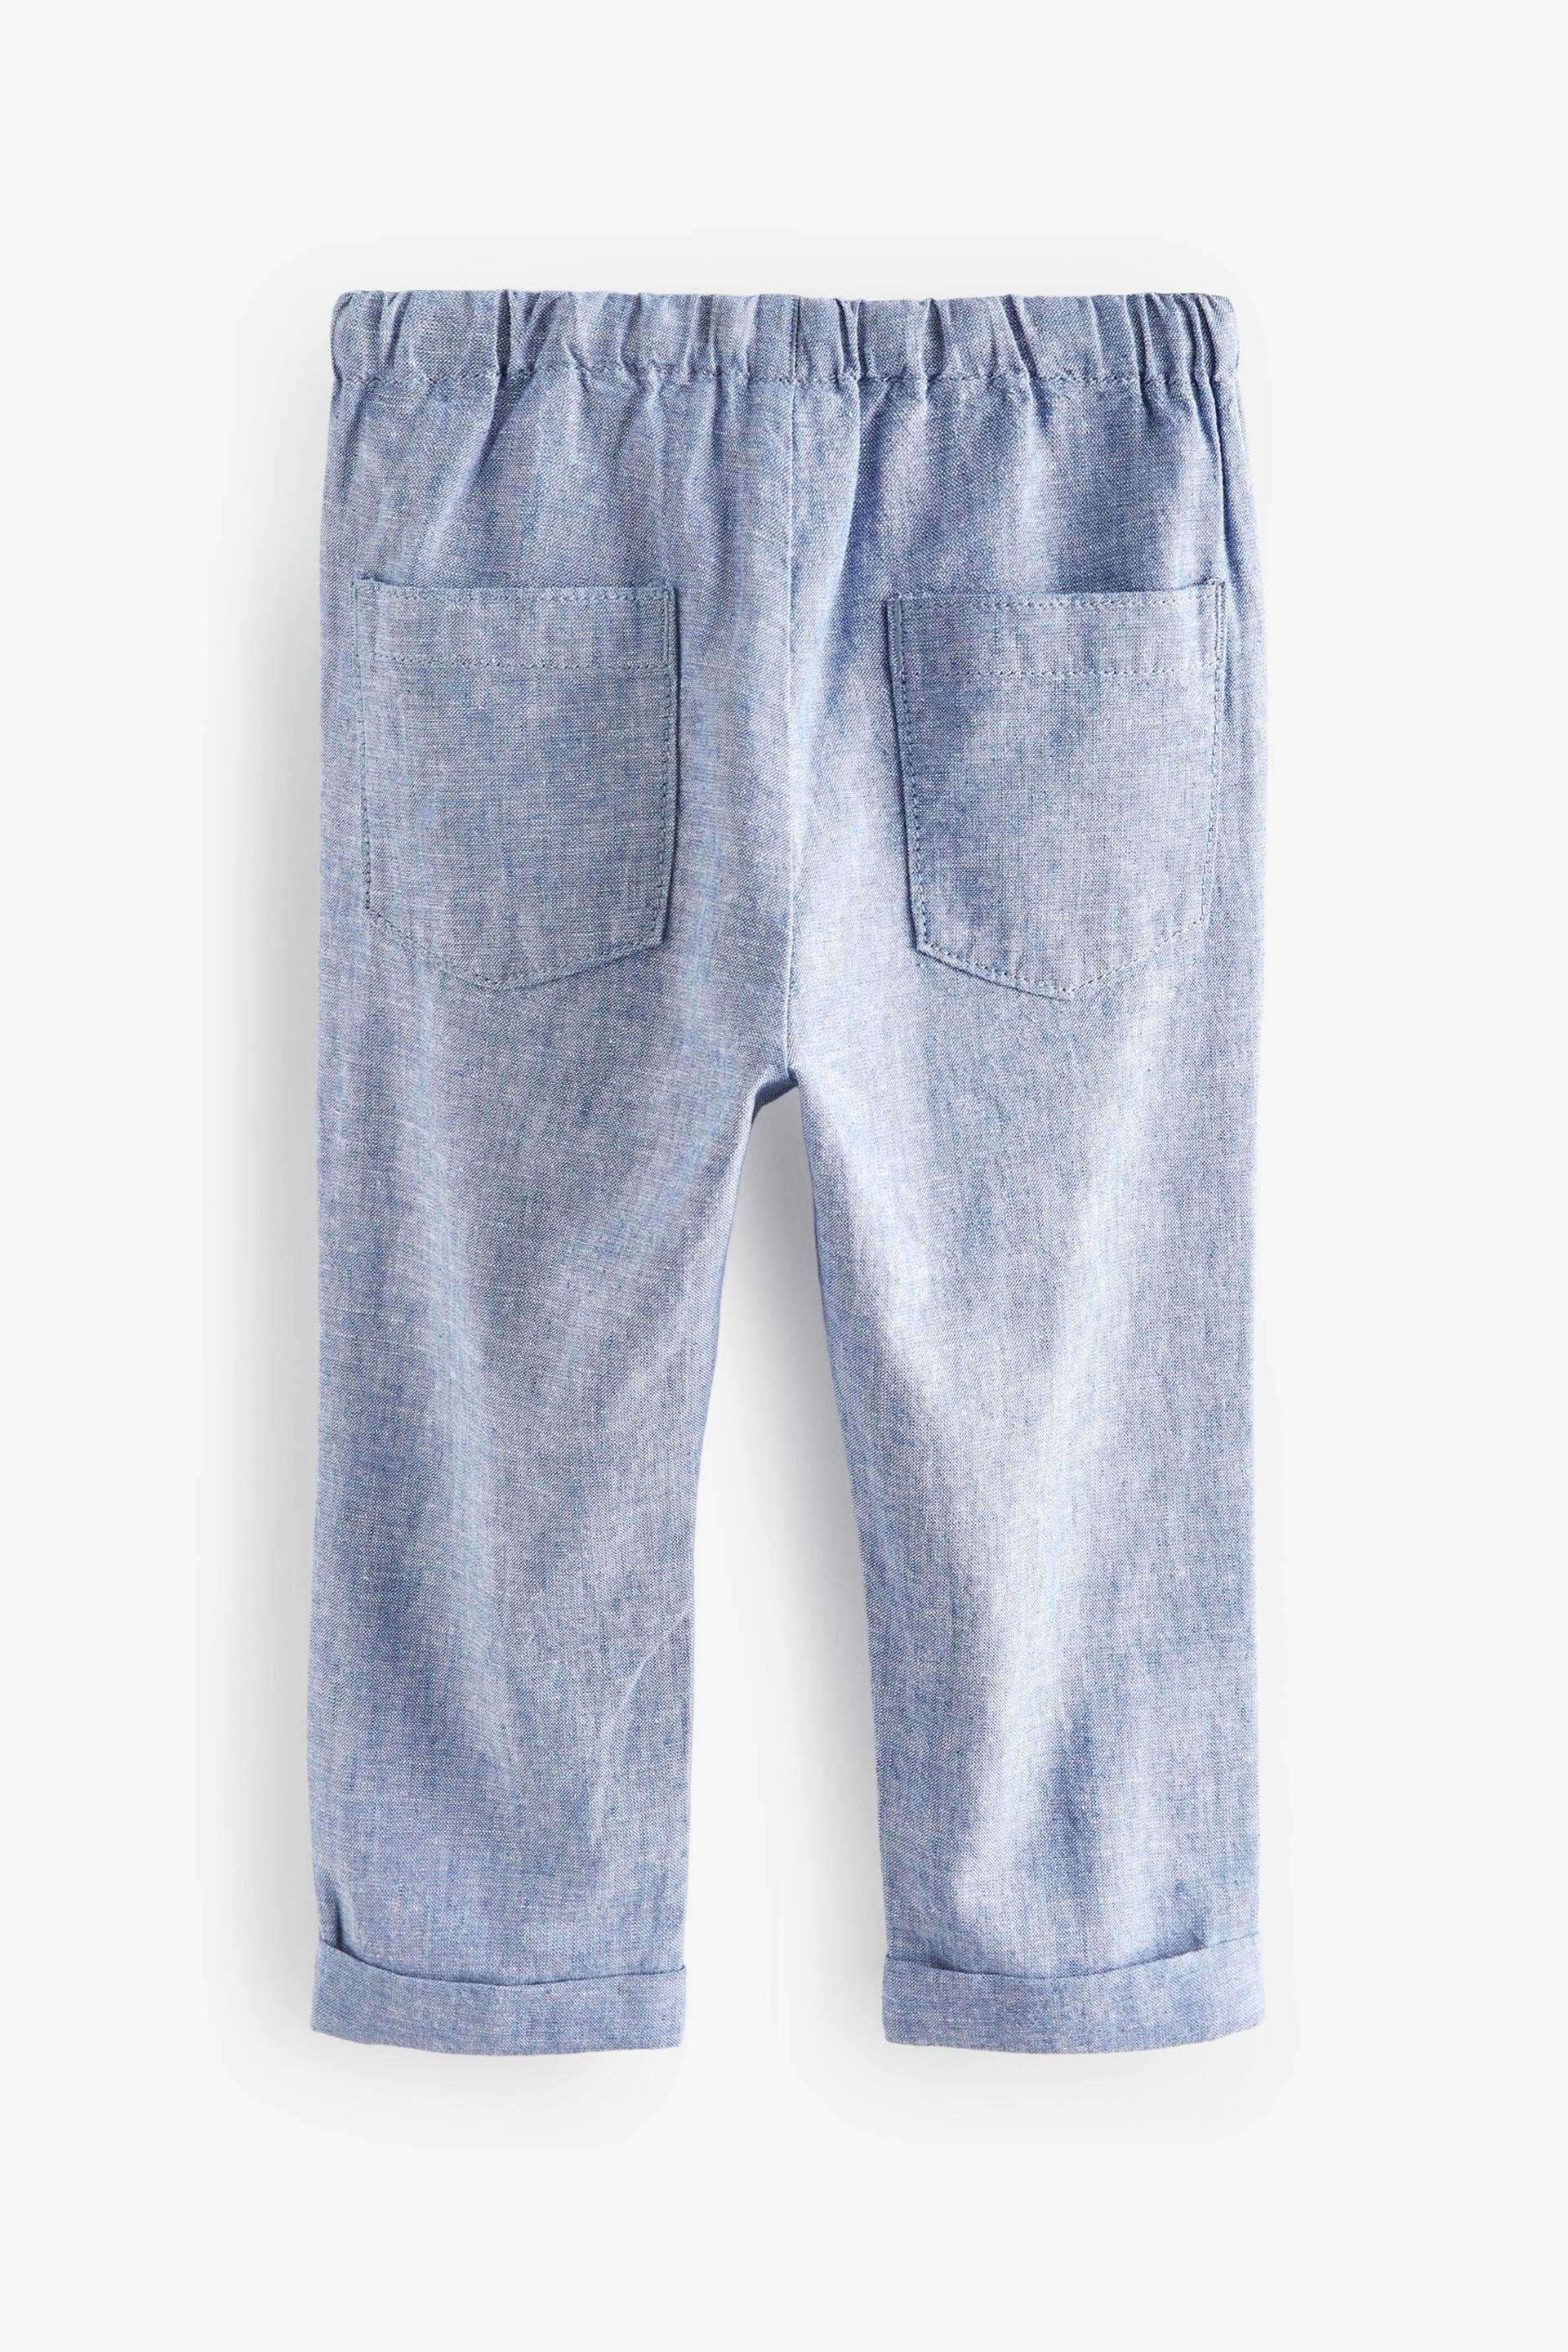 Chambray/White 2 Pack Linen Blend Pull On Trousers (3mths-7yrs) - Image 3 of 5